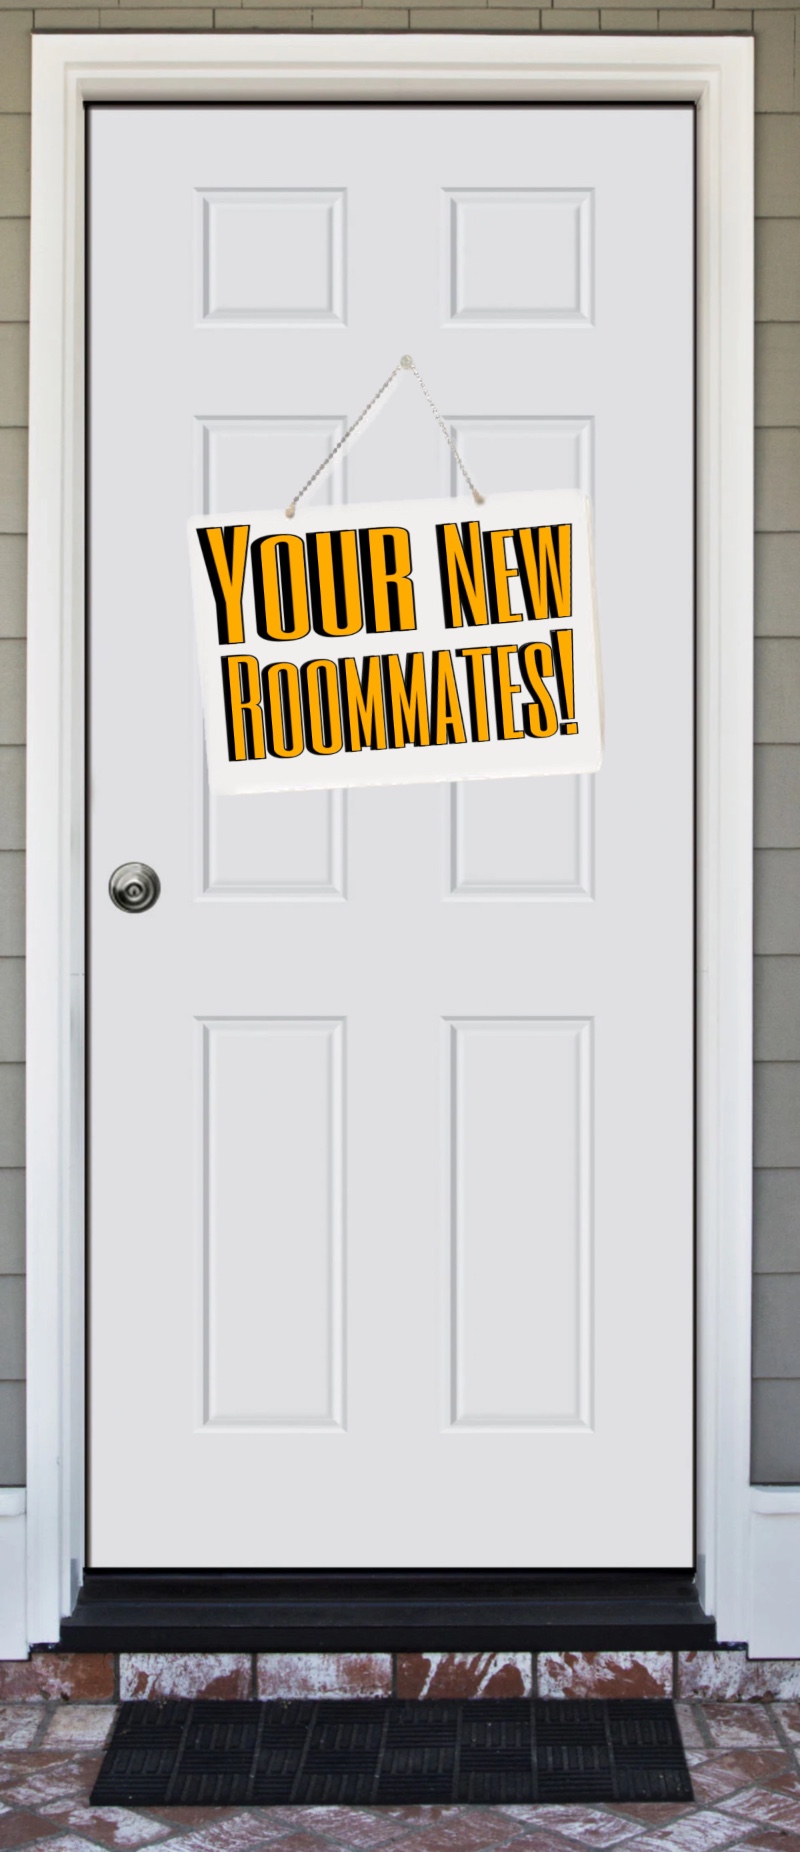 Avatar of Your New Roommates!